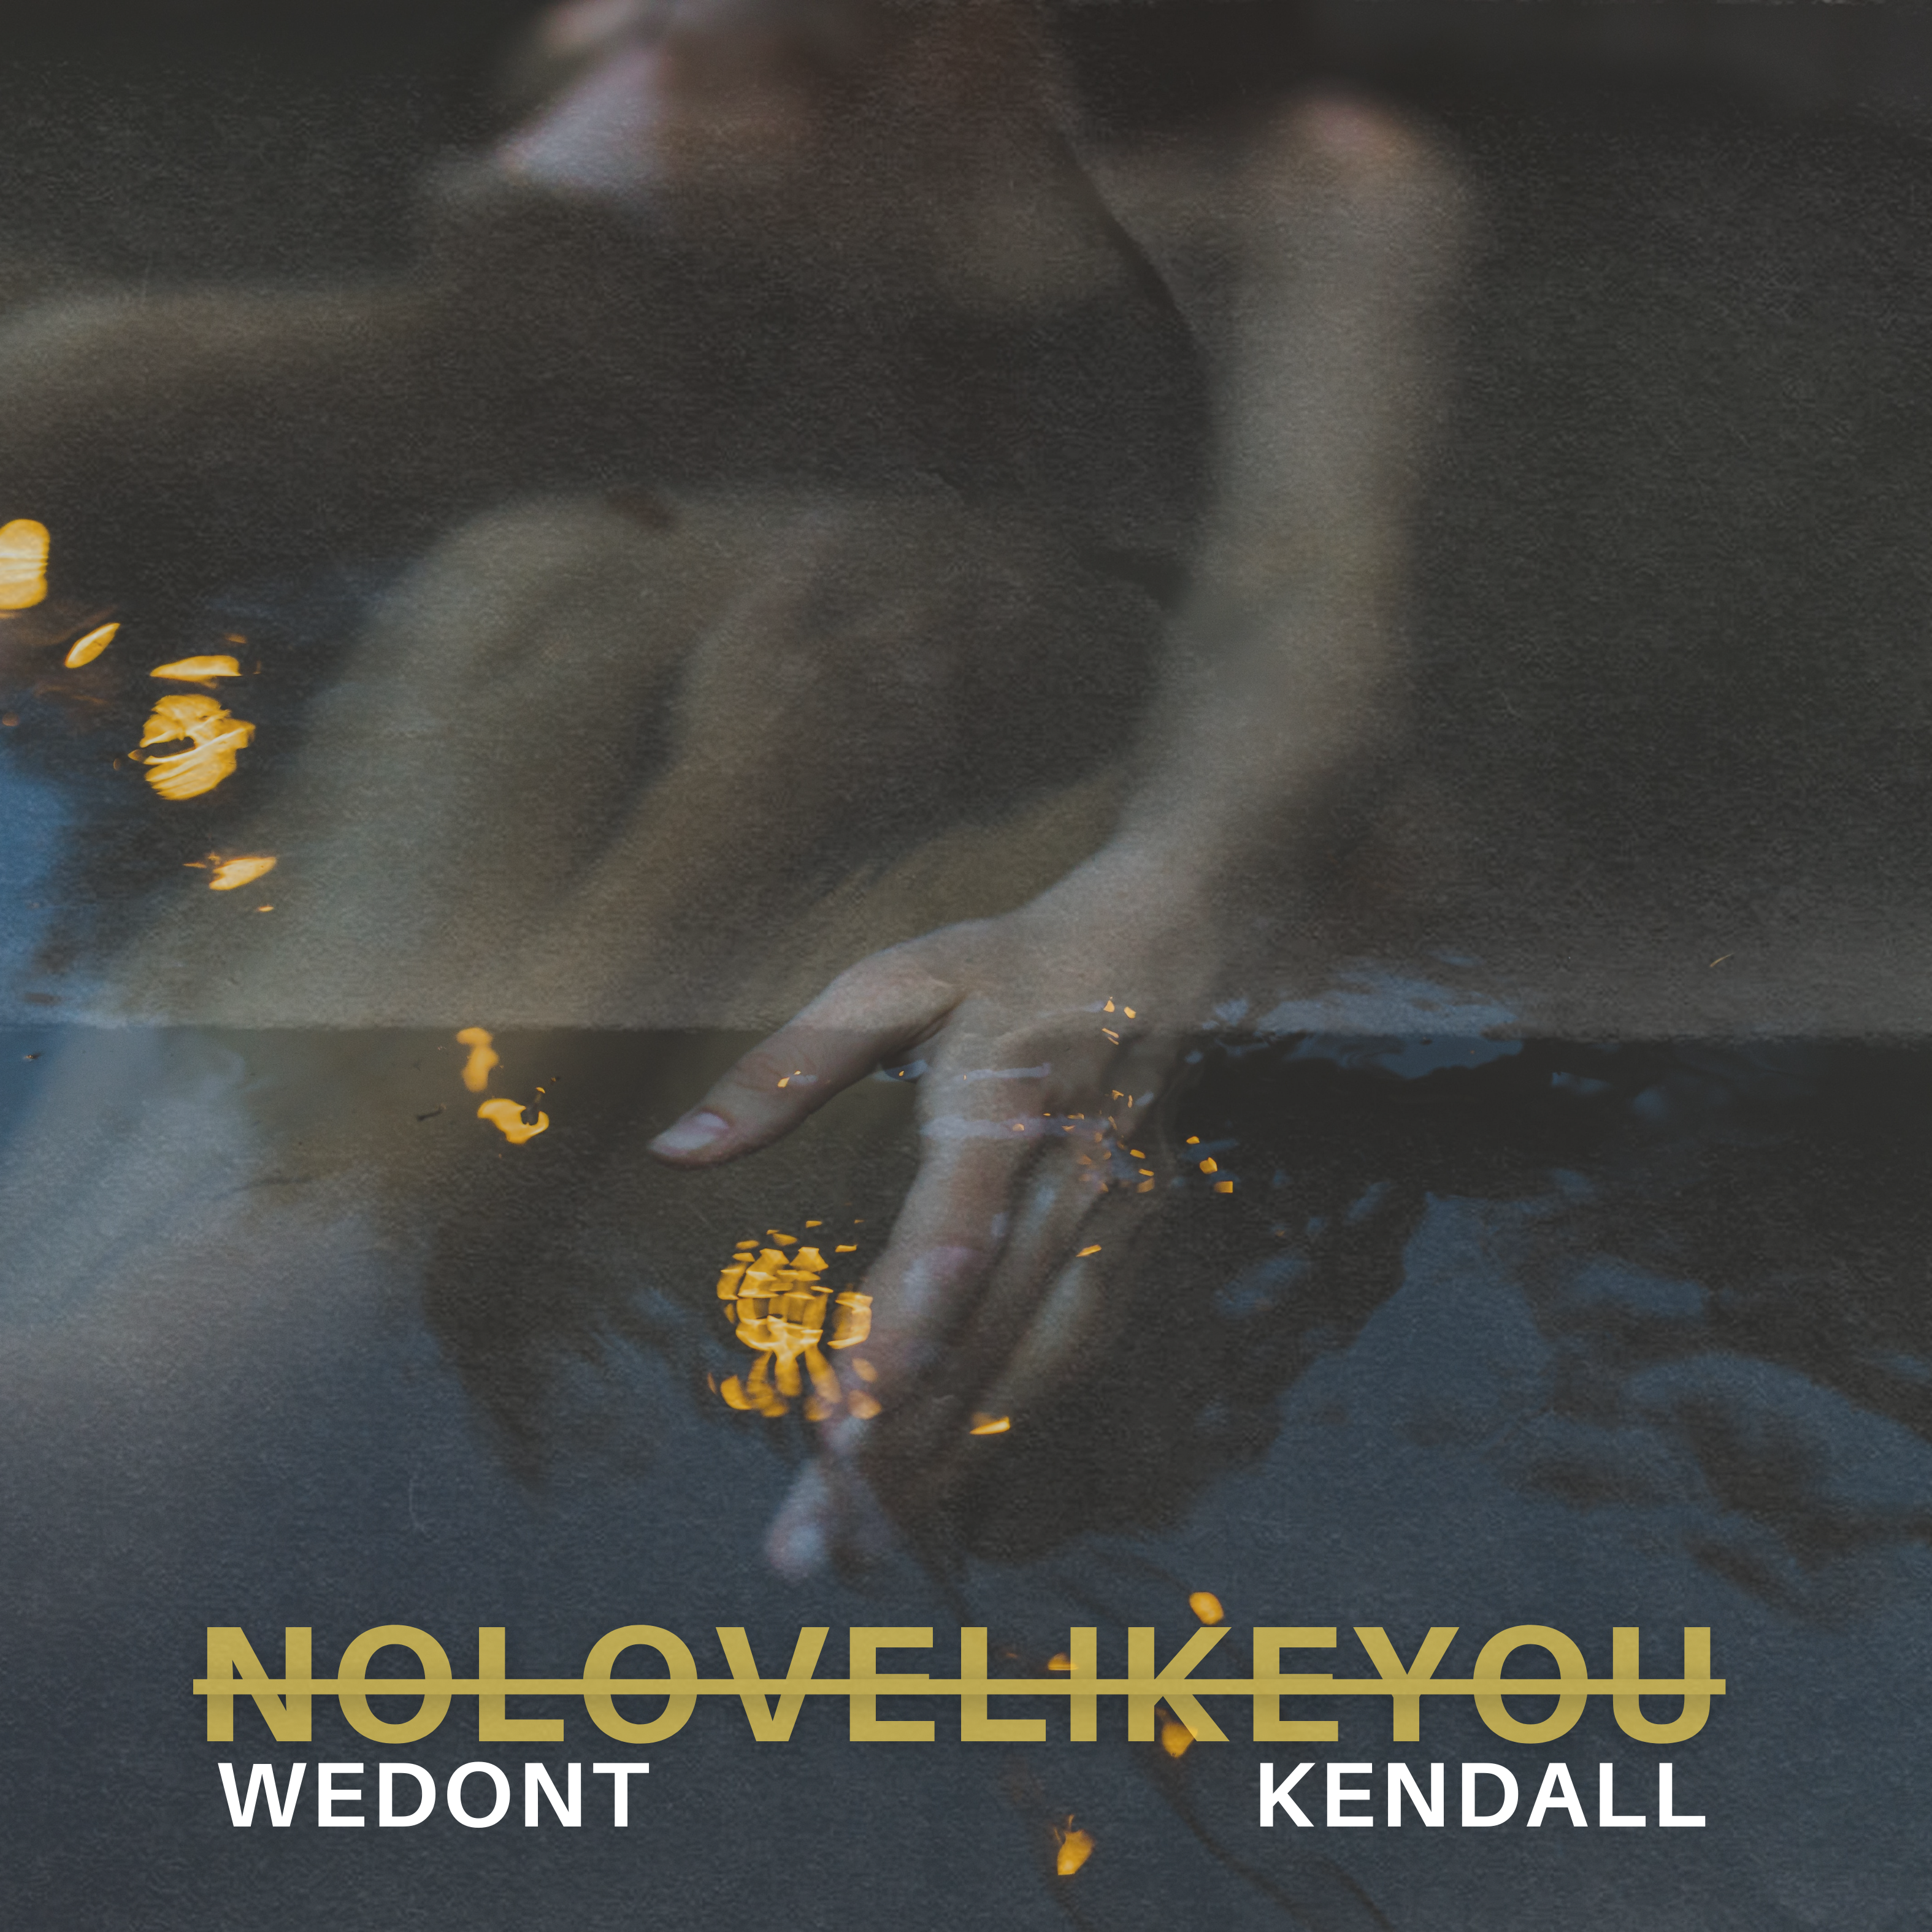 WEDONT and KENDALL met in 2022 and released their first collaboration called "Not Fully In" on Chapter Eight Records in may 2023. Their song already hit +900k streams on Spotify and 1Million streams on all platforms. They're back with a vibing chill slow house song with a smooth and catchy chorus that will take you higher and captivate your mind. KENDALL is a great lyricist with already solid releases on her side. WEDONT is an accomplish singer and EDM producer with Millions of streams and already hit Top Charts in Australia, Poland and Belgium. He signed some banging singles on Hussle Recording, Chapter Eight and other major labels worldwide.